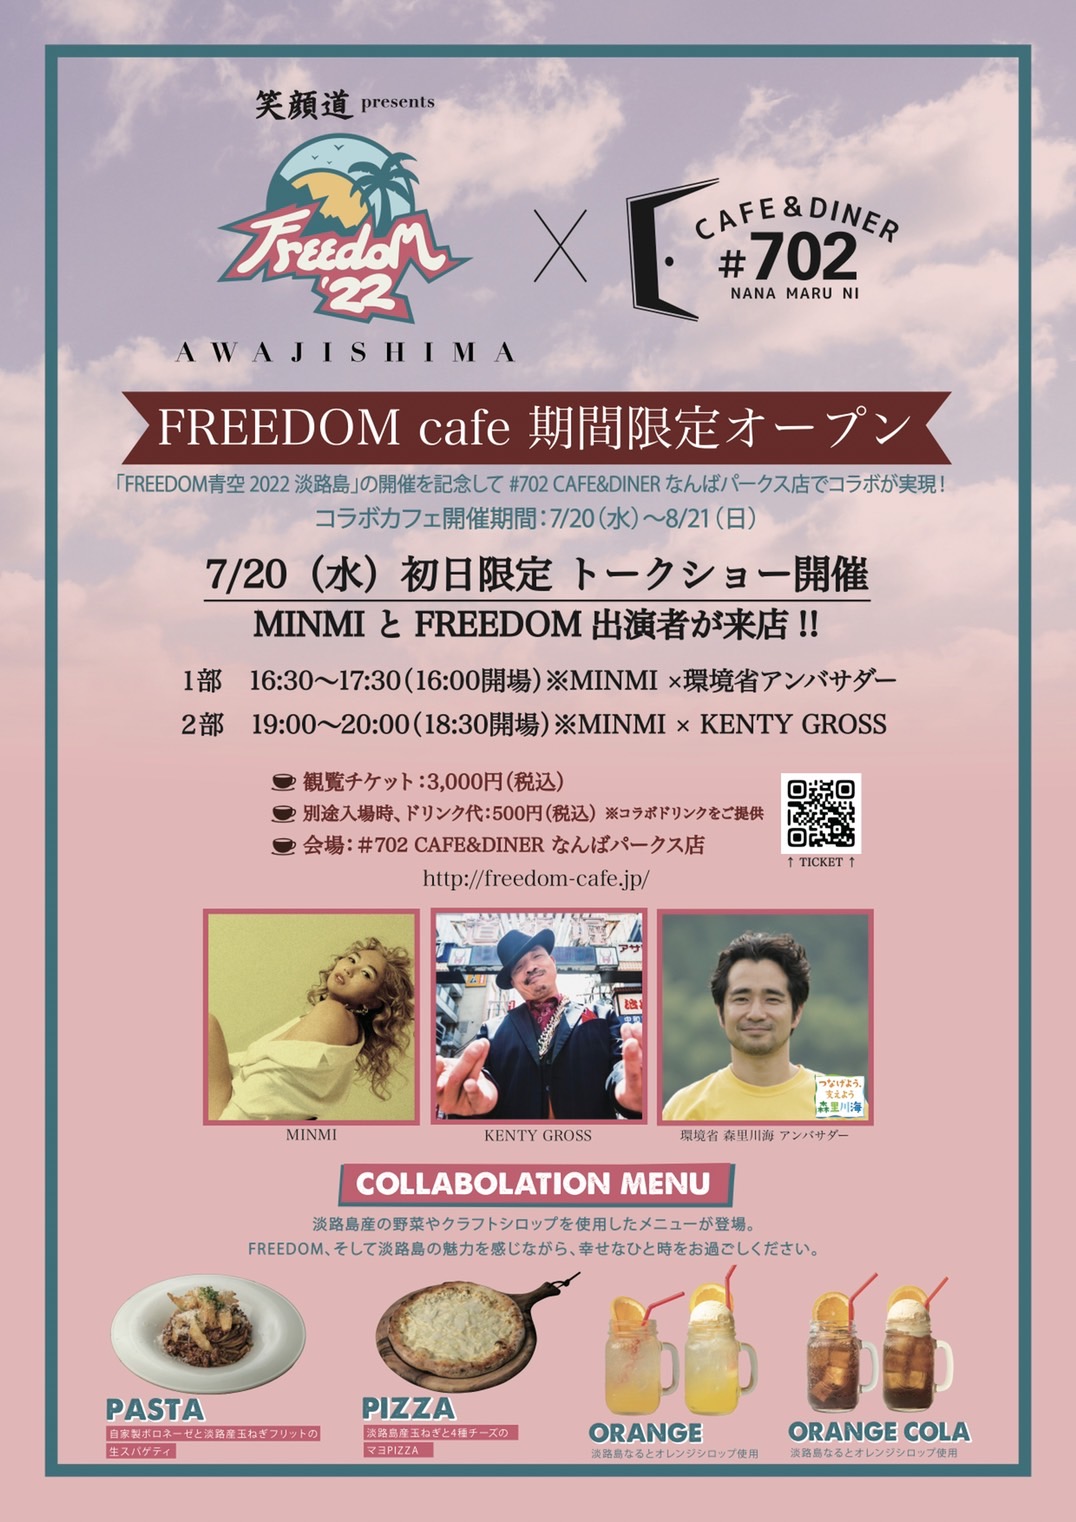 FREEDOM cafe　#702 CAFE&DINER なんばパークス店　MINMI